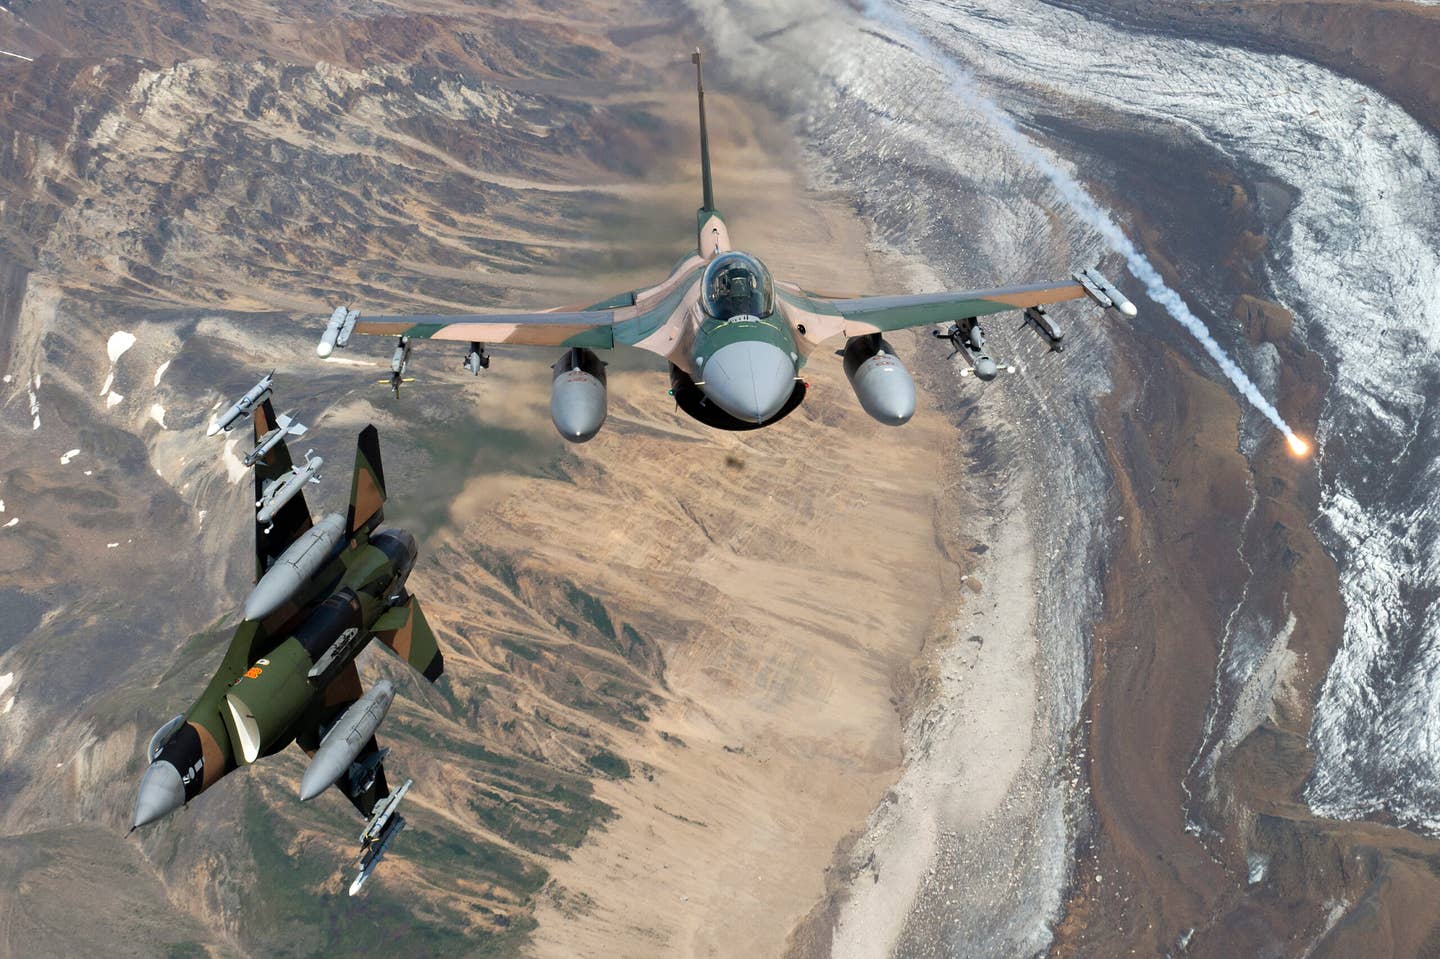 U.S. Air Force F-16 Fighting Falcons from Eielson Air Force Base, fly in formation over the Joint Pacific Alaska Range Complex on July 18, 2019. The JPARC is a 67,000 plus square mile area, providing a realistic training environment commanders leverage for full spectrum engagements, ranging from individual skills to complex, large-scale joint engagements. (U.S. Air Force photo by Staff Sgt. James Richardson)